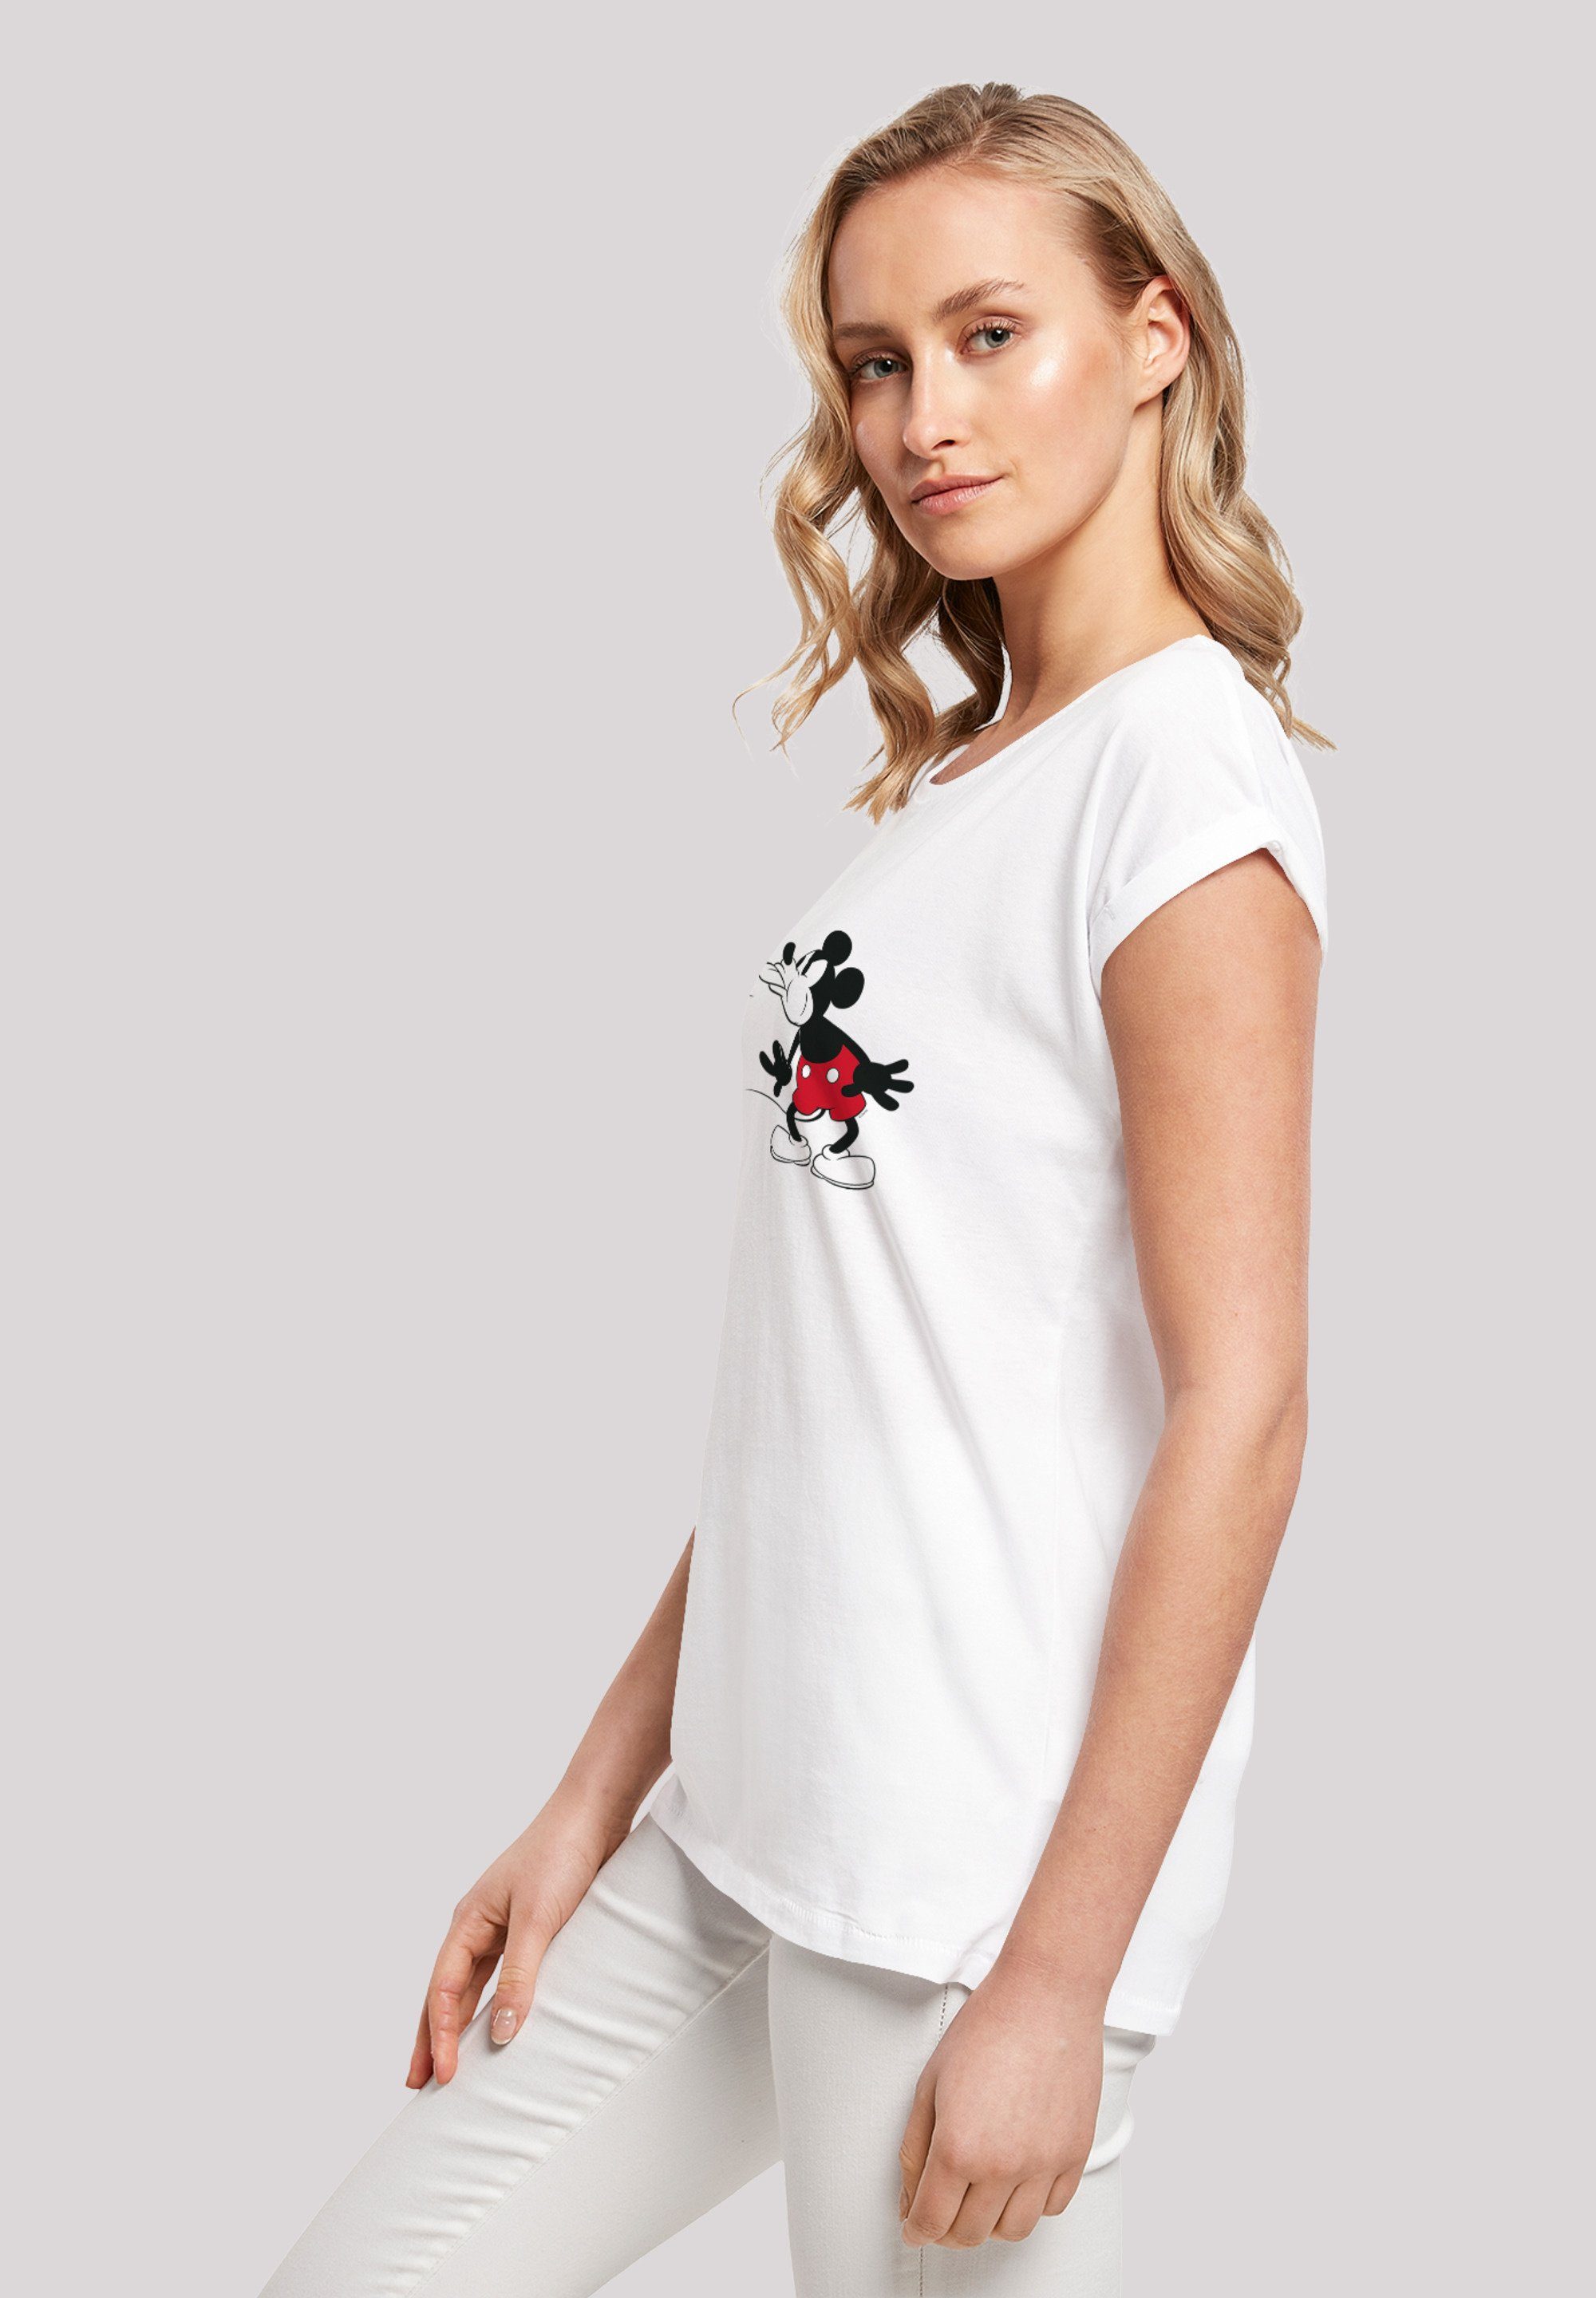 F4NT4STIC T-Shirt Mouse Mickey Classic Micky Disney Print Vintage Maus